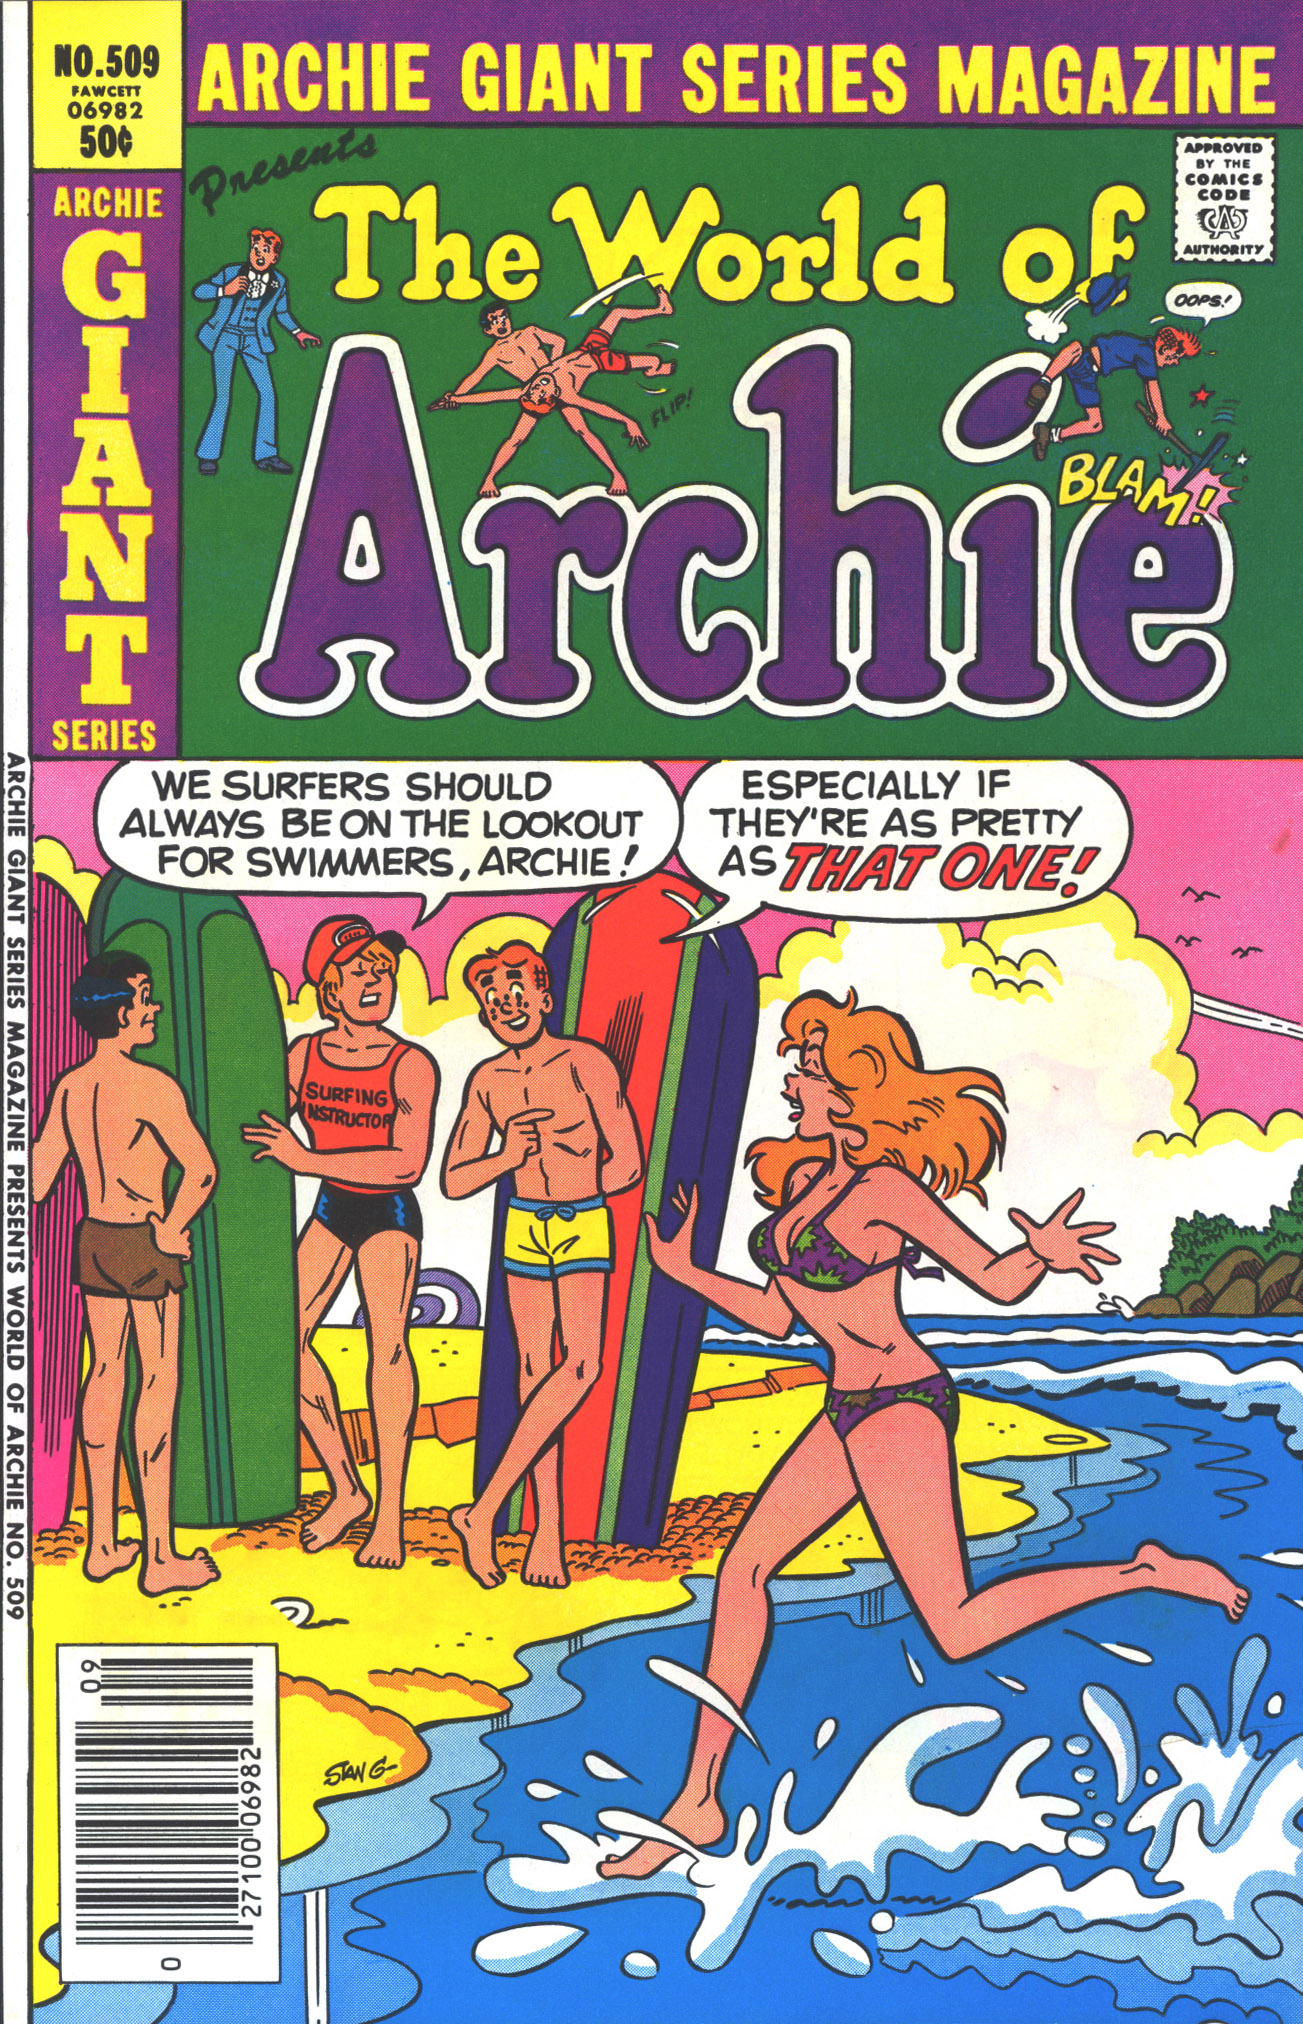 Read online Archie Giant Series Magazine comic -  Issue #509 - 1